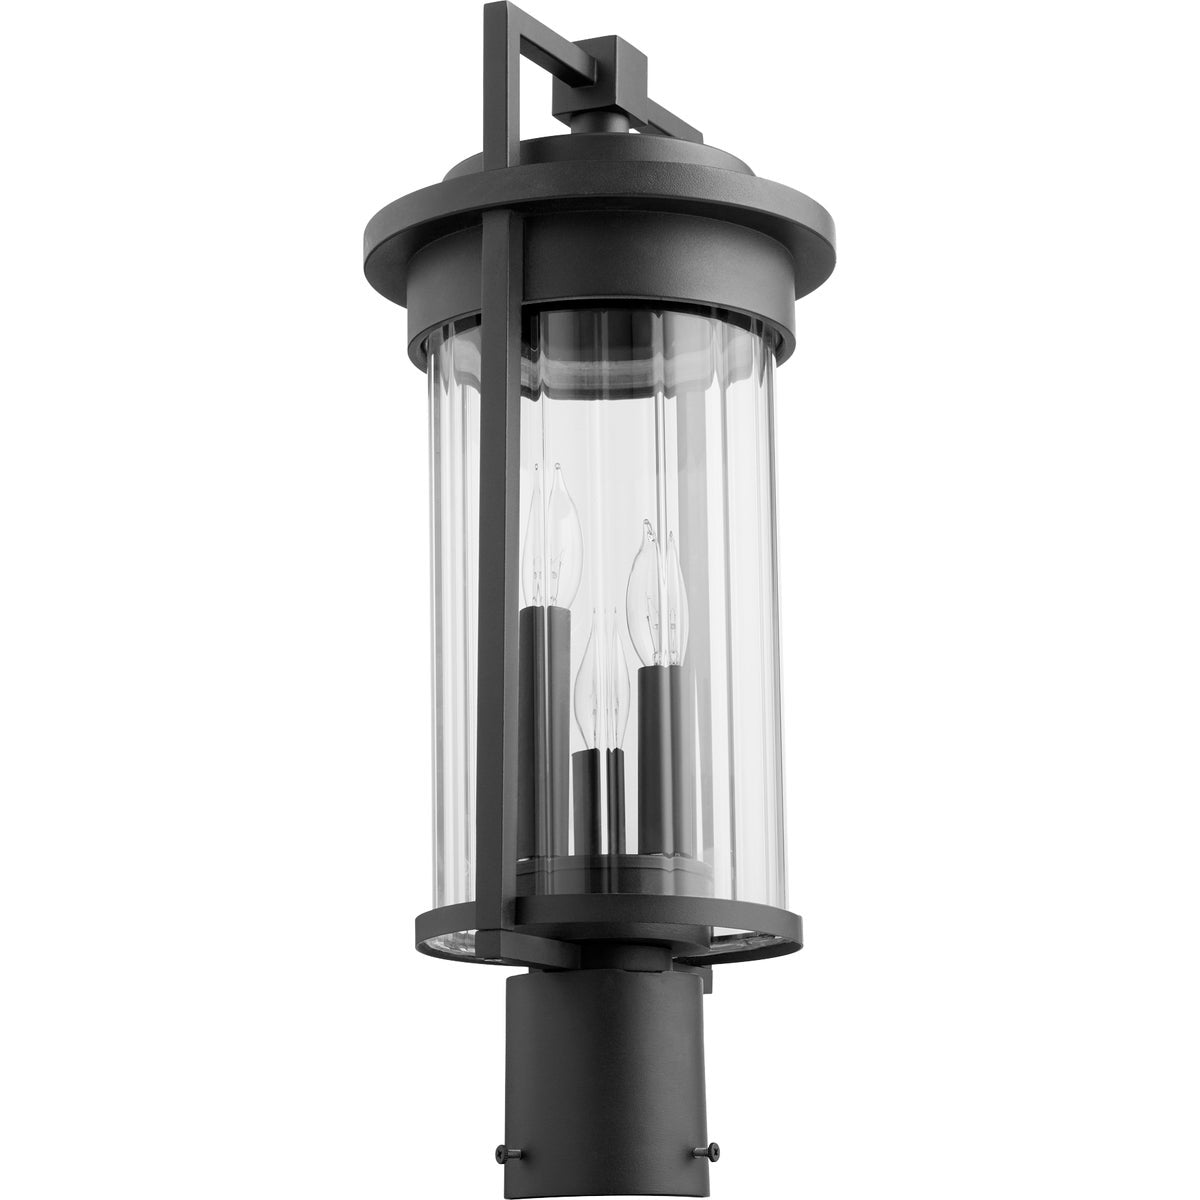 Contemporary Outdoor Post Light with clear glass shade, metal construction, and clean lines. Wet location rated. 40W, 120V, 3 bulbs (not included). 8.5&quot;W x 19.5&quot;H. UL Listed. 2-year warranty.